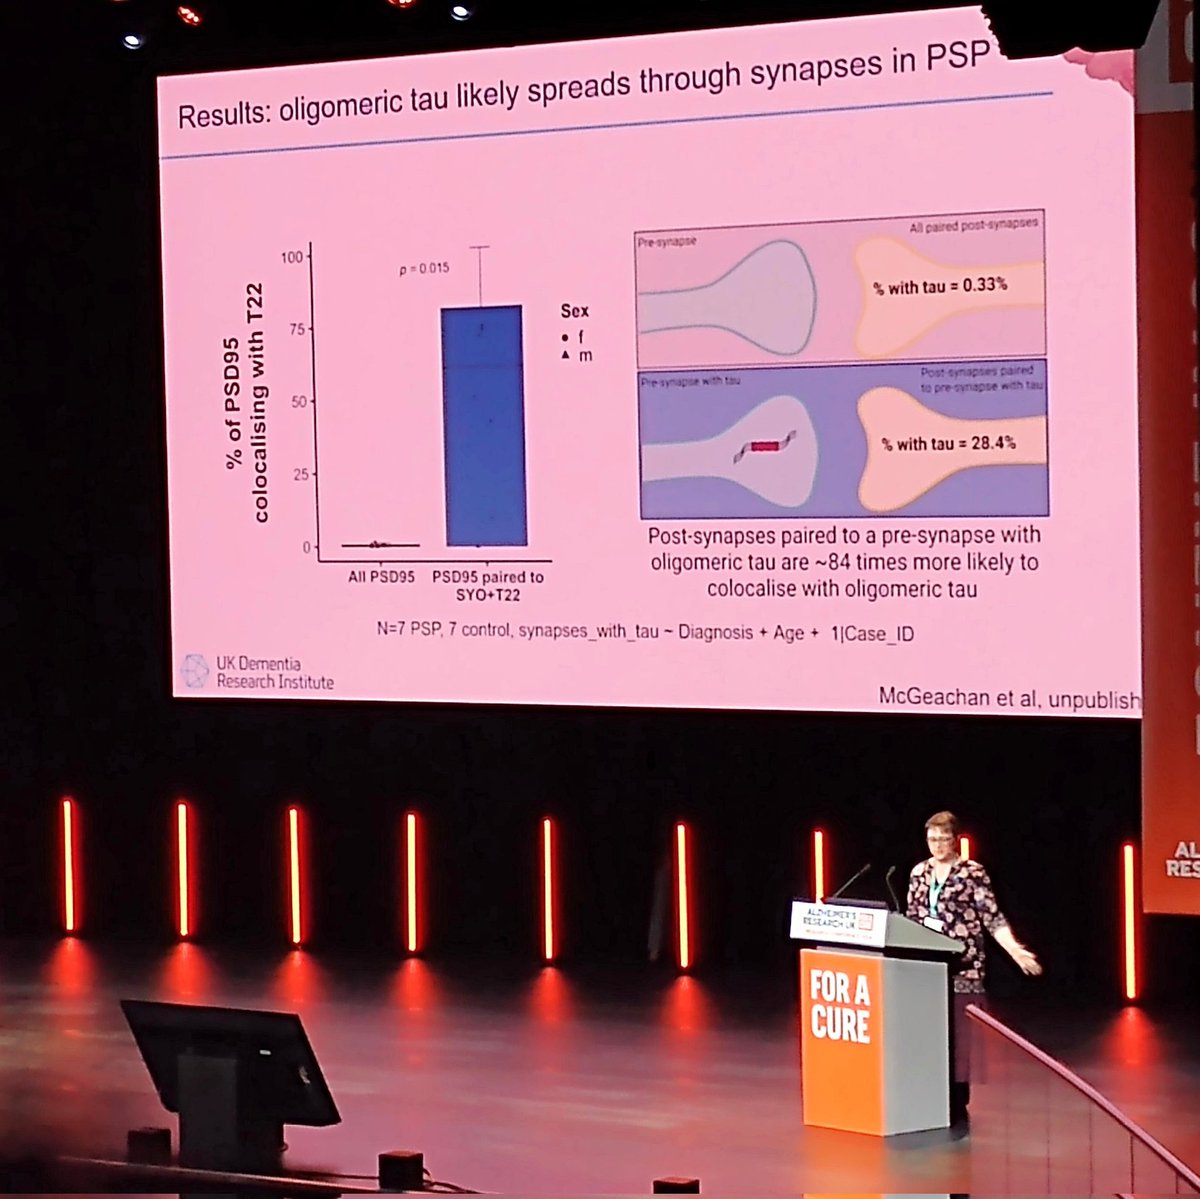 We've had a fantastic time at #ARUKConf24 this week, and lovely to end it with our President @TSpiresJones's closing talk on synaptic propagation of tau in Alzheimer's and Progressive Supranuclear Palsy. Congratulations to @ARUKscientist for a great conference